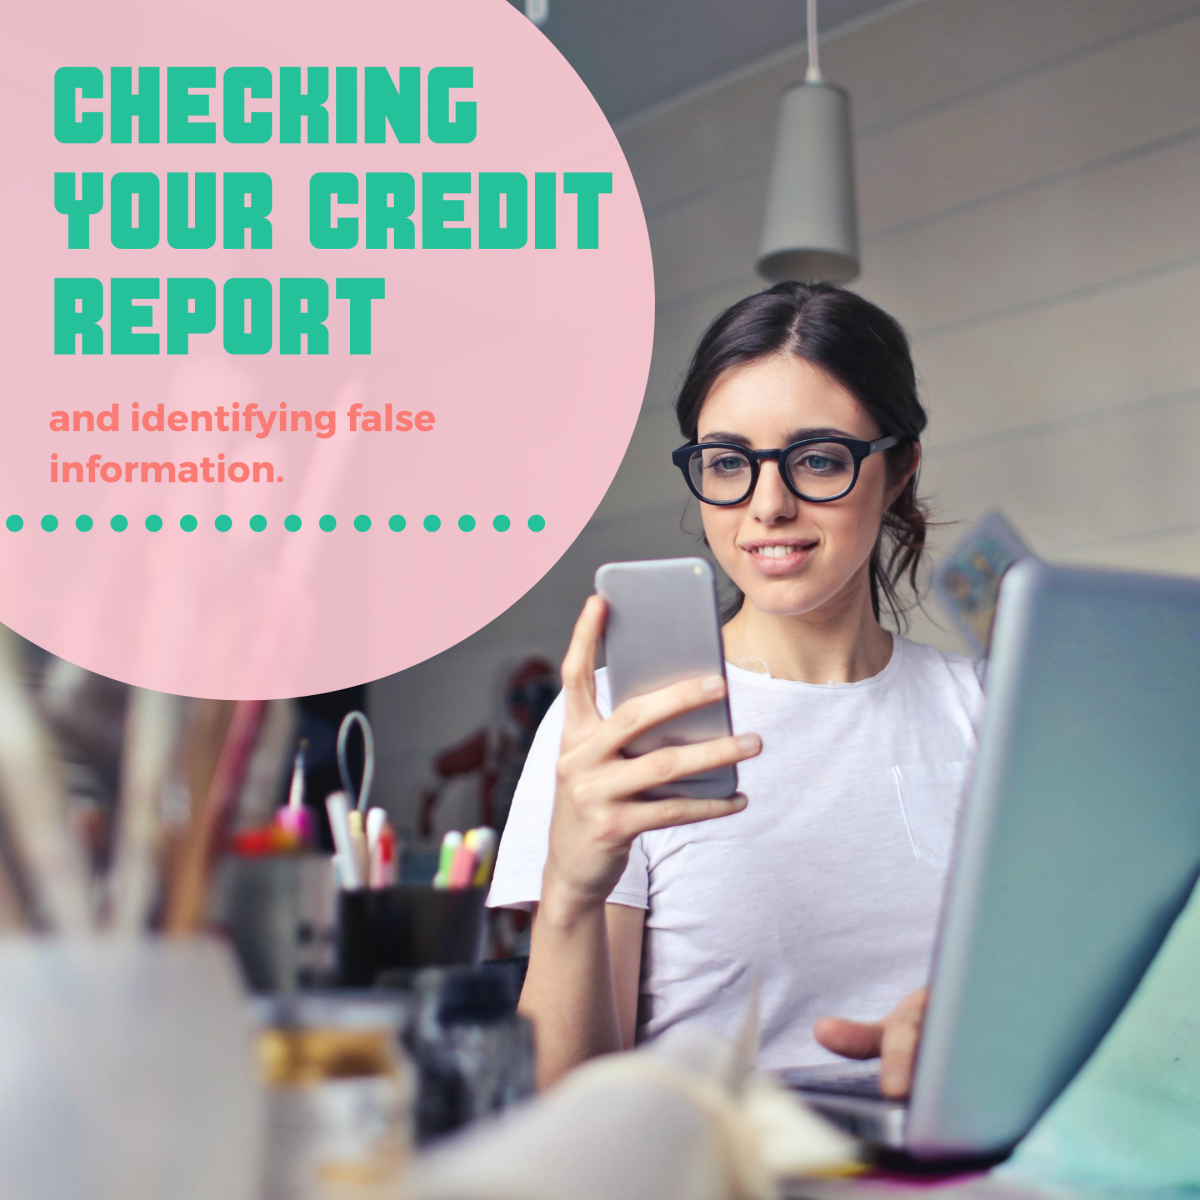 Check your credit!